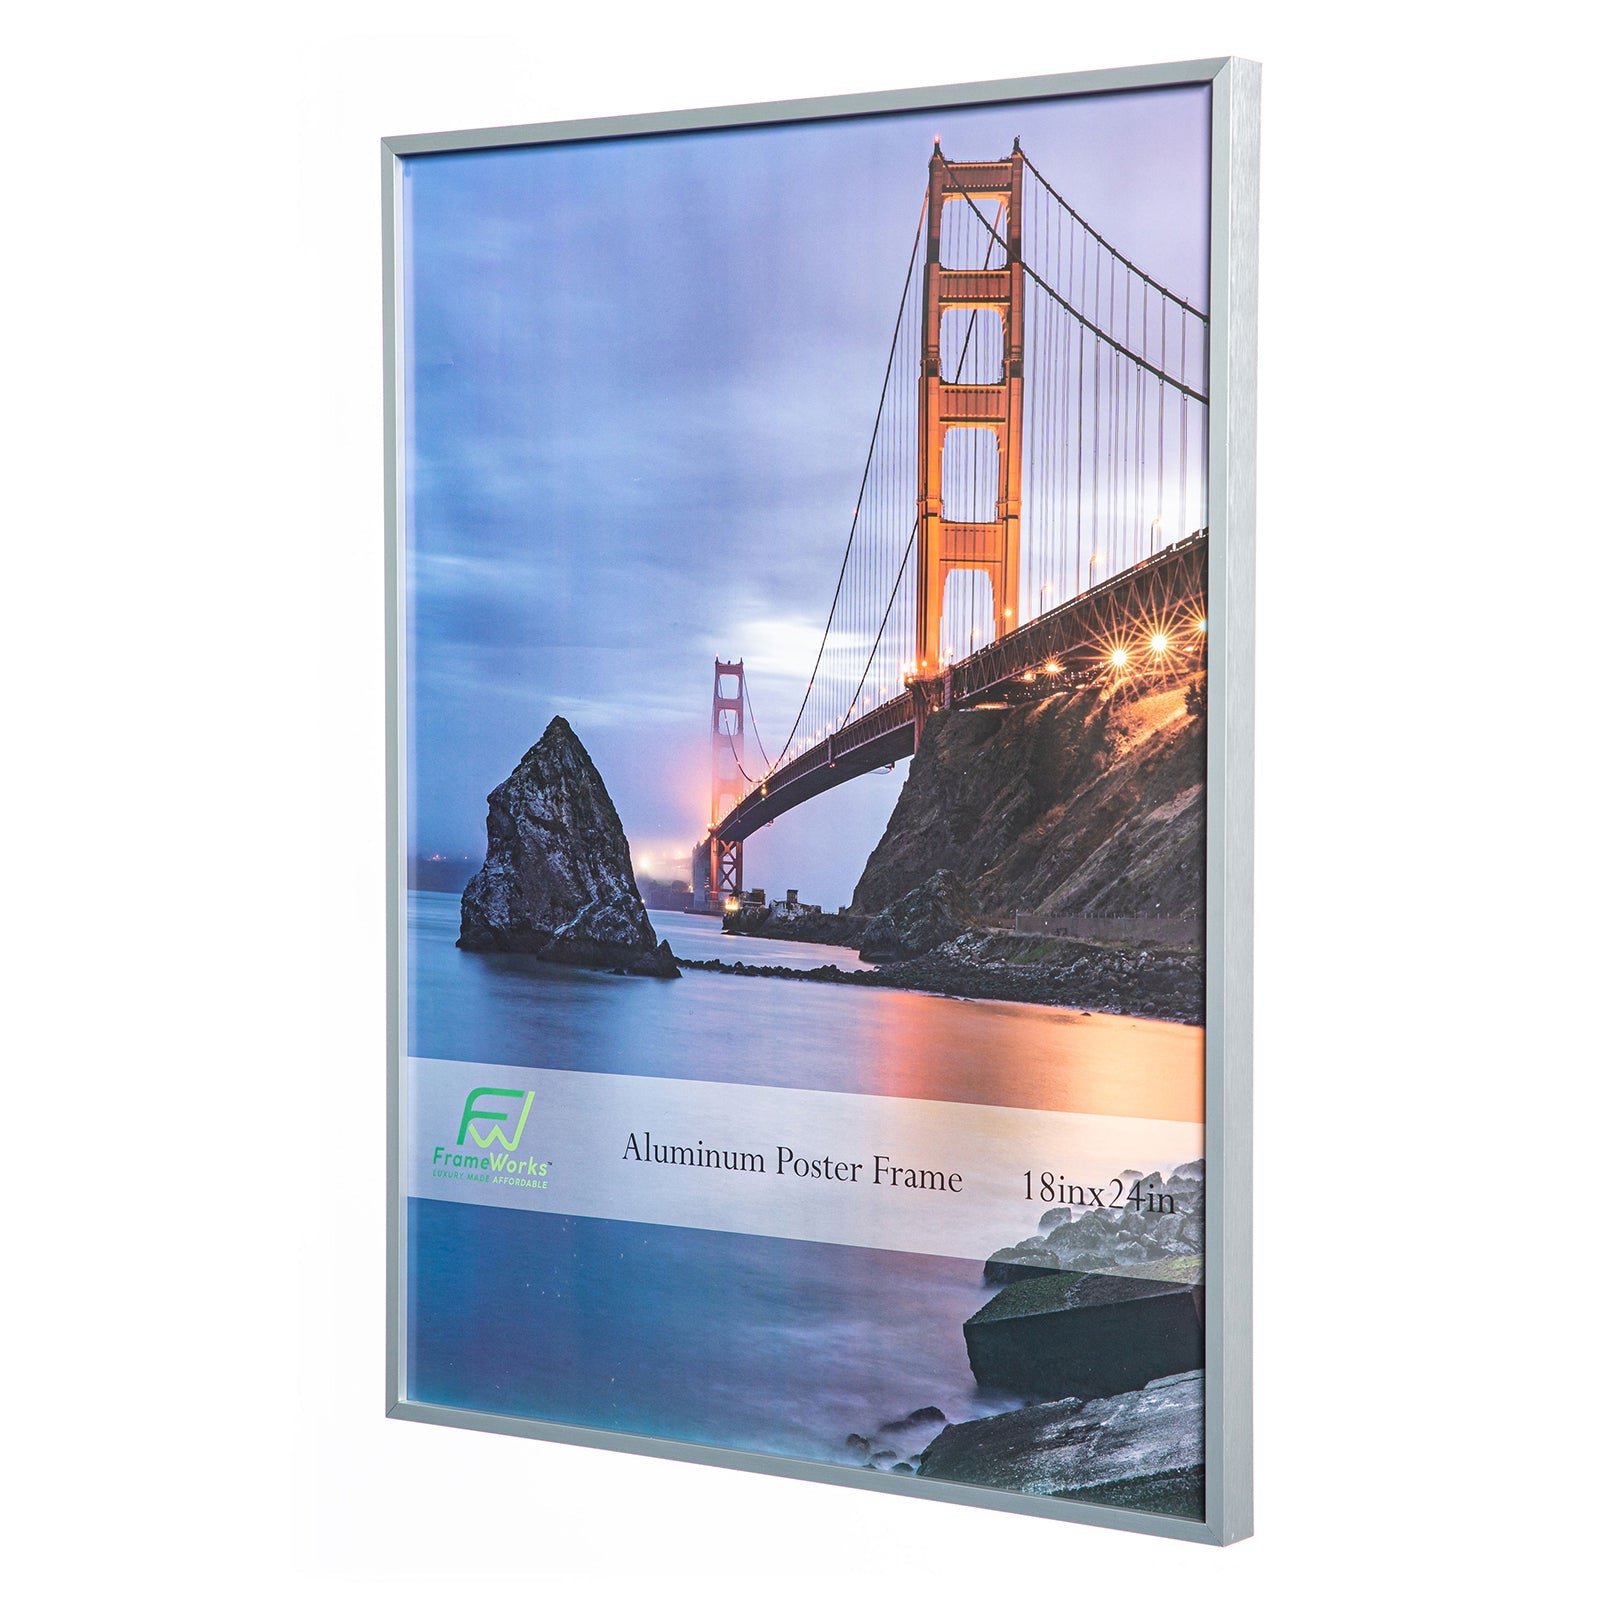 18" x 24" Silver Brushed Aluminum Poster Picture Frame with Plexiglass